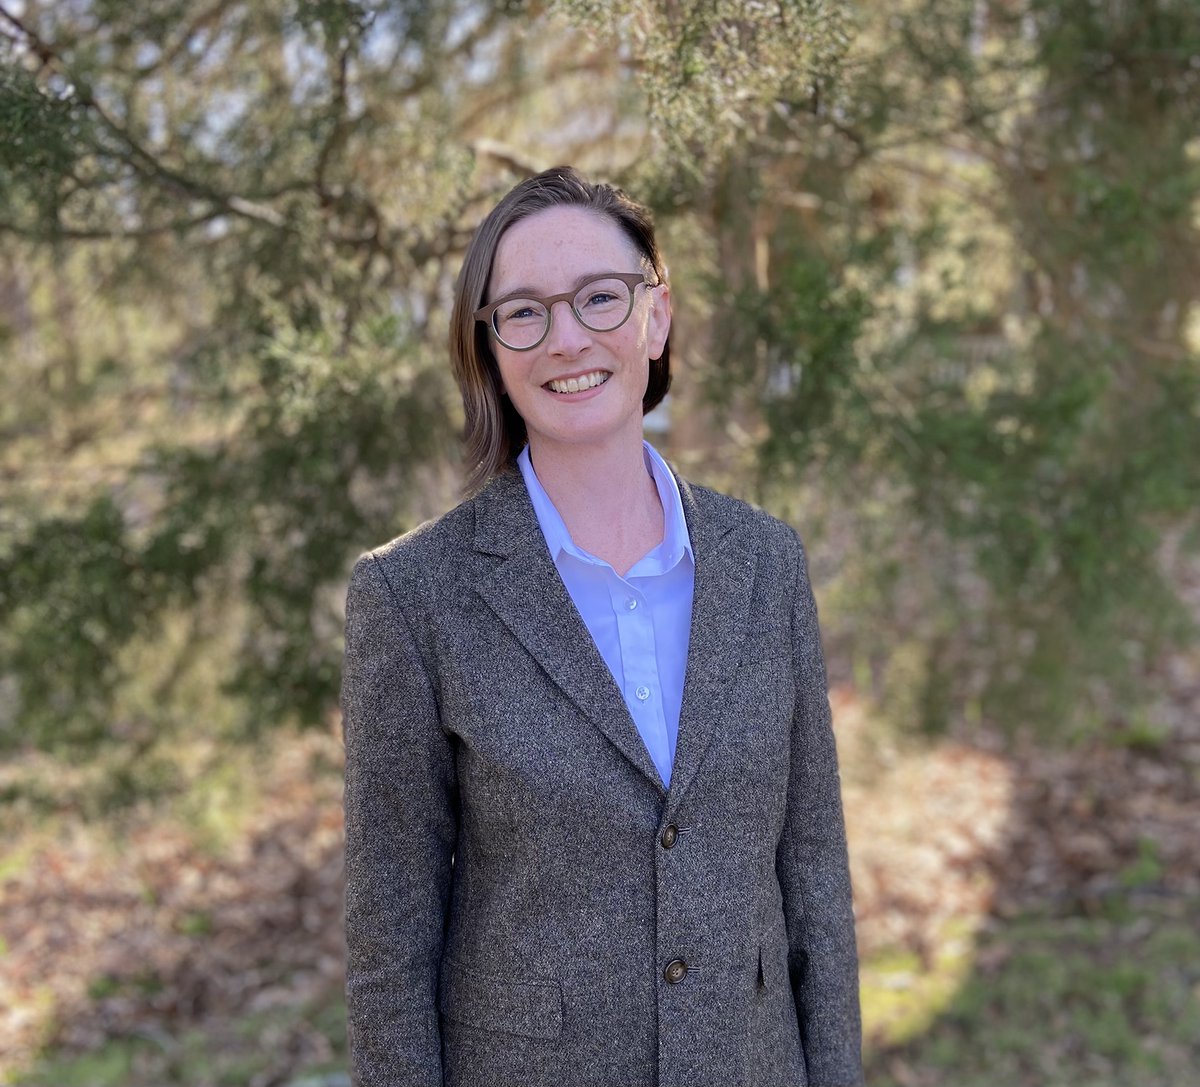 🎉We are thrilled to announce that the inaugural Persun Visiting Scholar is Dr. KT Shively! They are an associate professor of Civil War and Reconstruction history at Virginia Commonwealth University with specialties in early American military, environmental, & medical history.